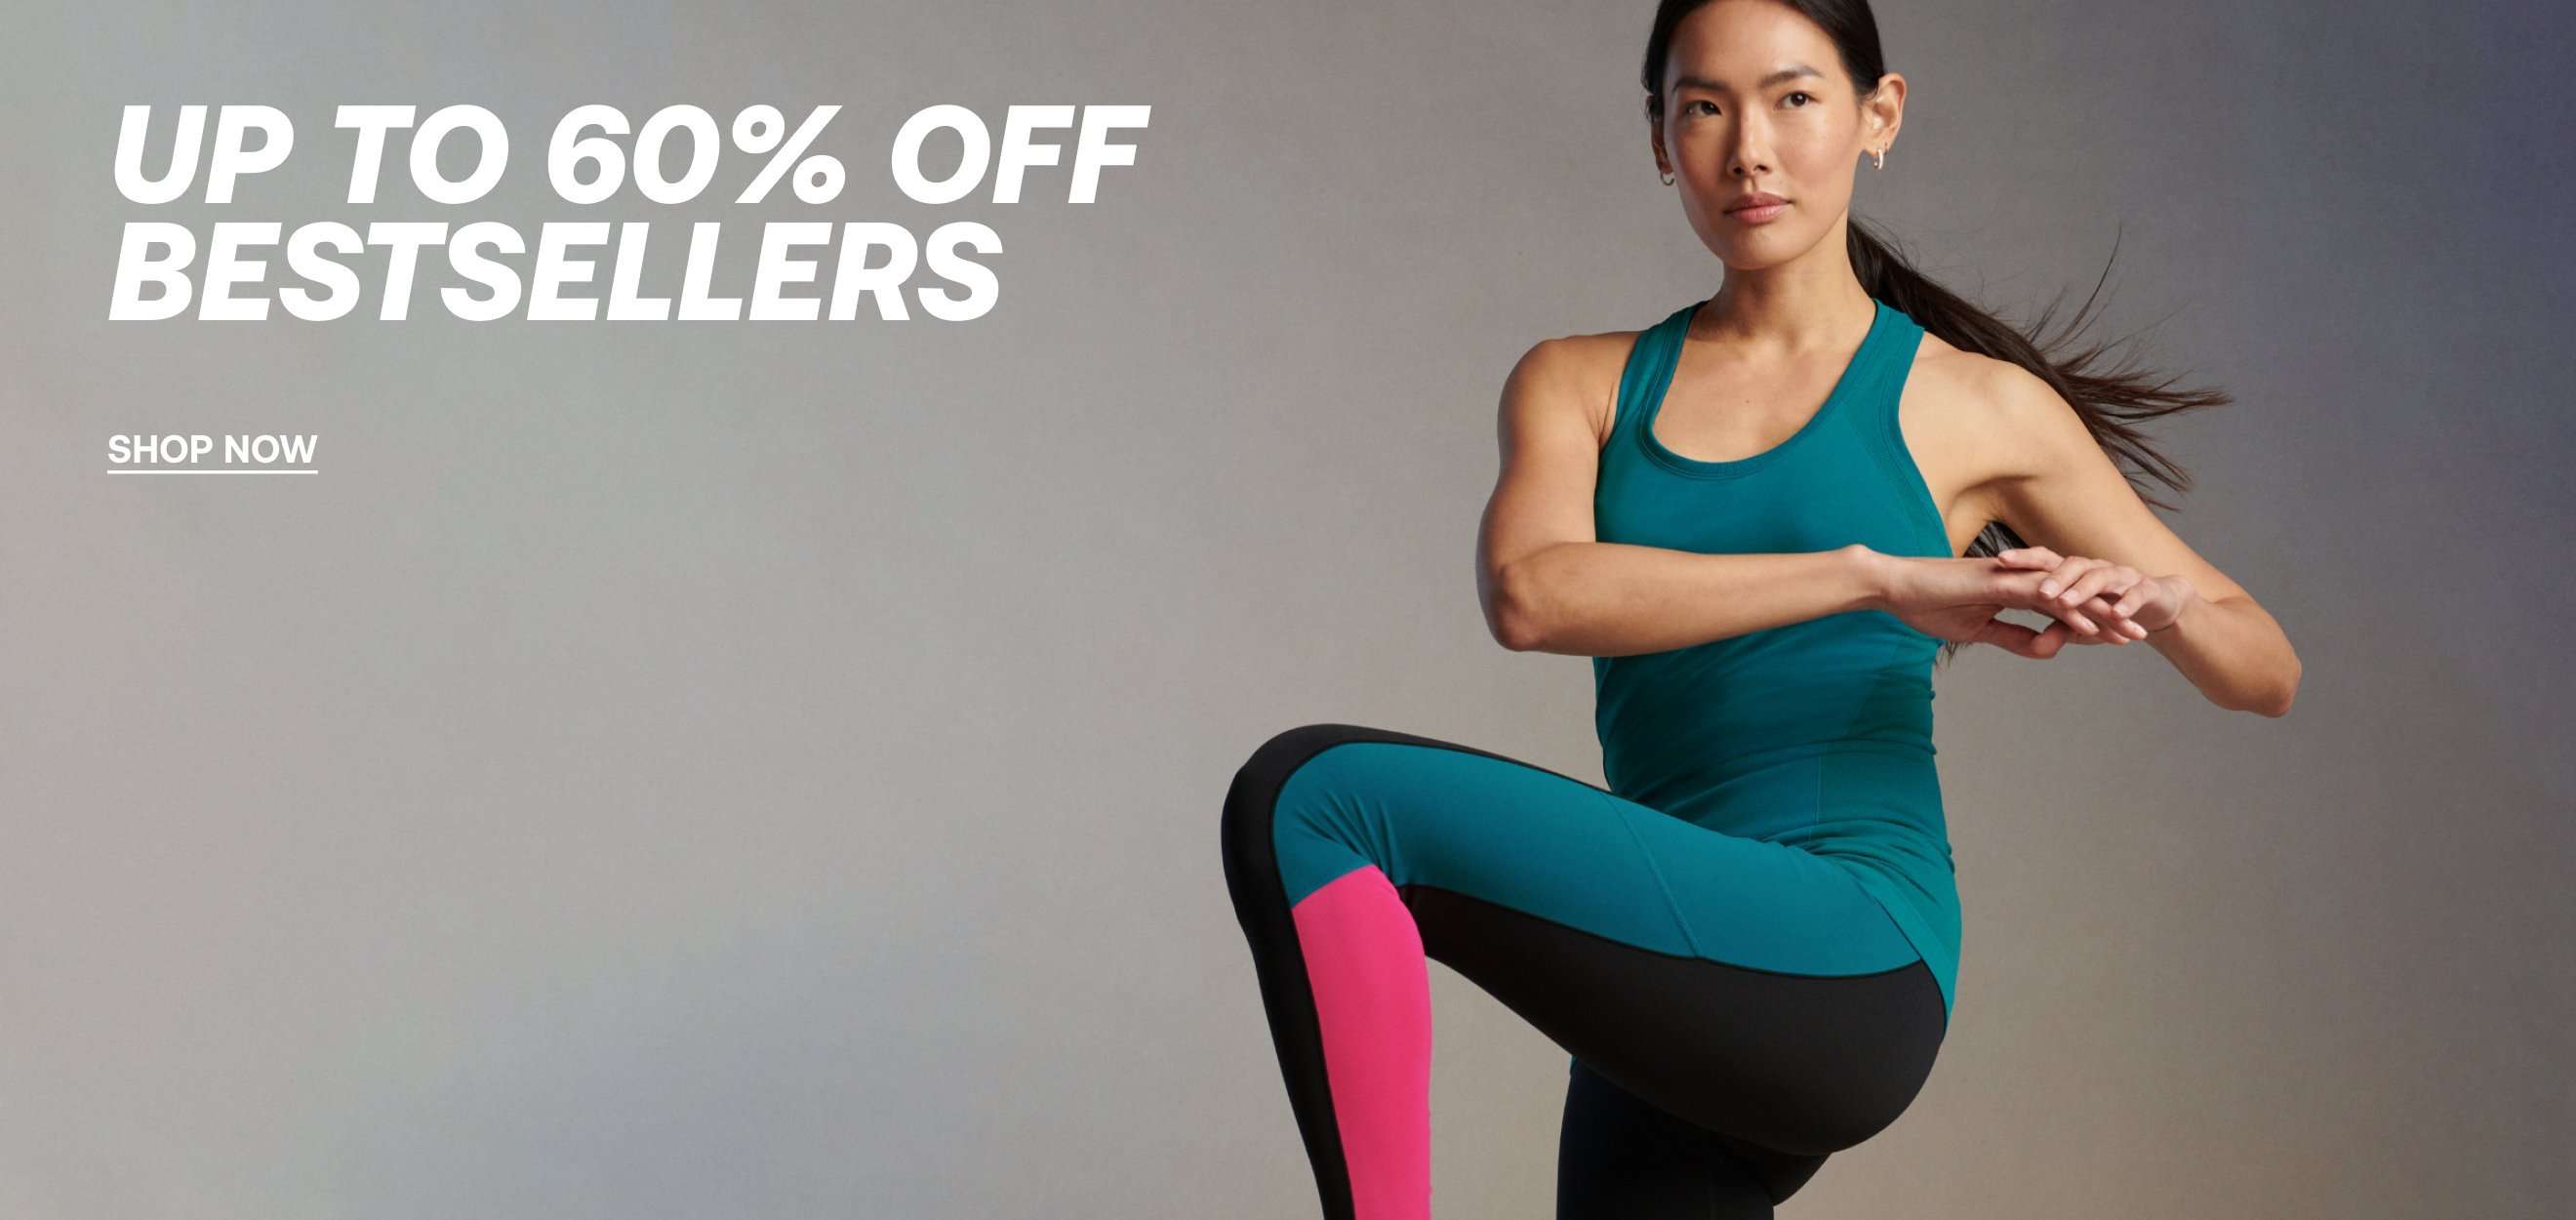 Up to 60% off Bestsellers